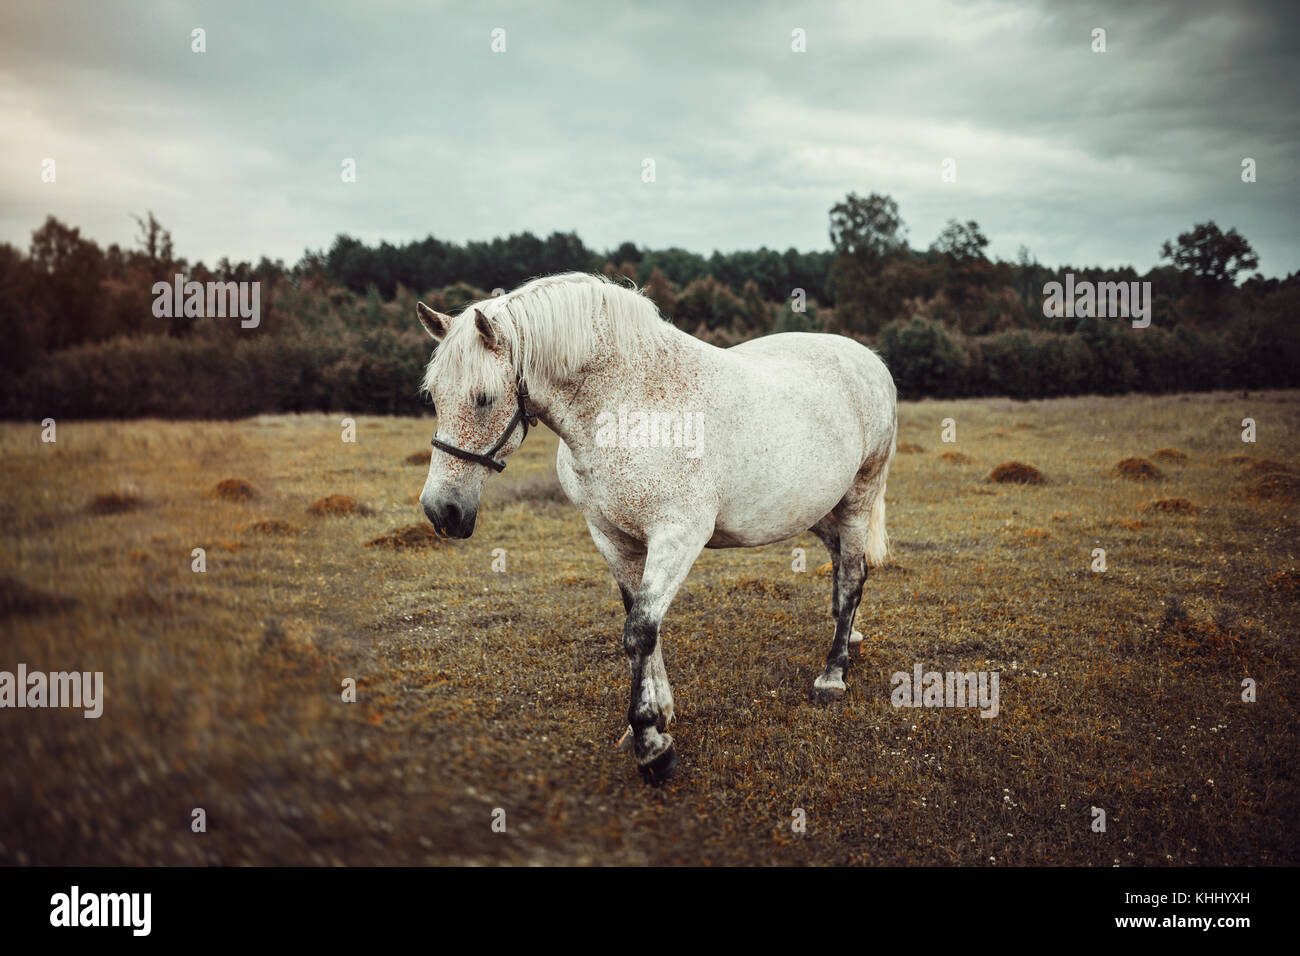 White horse with freckles Stock Photo